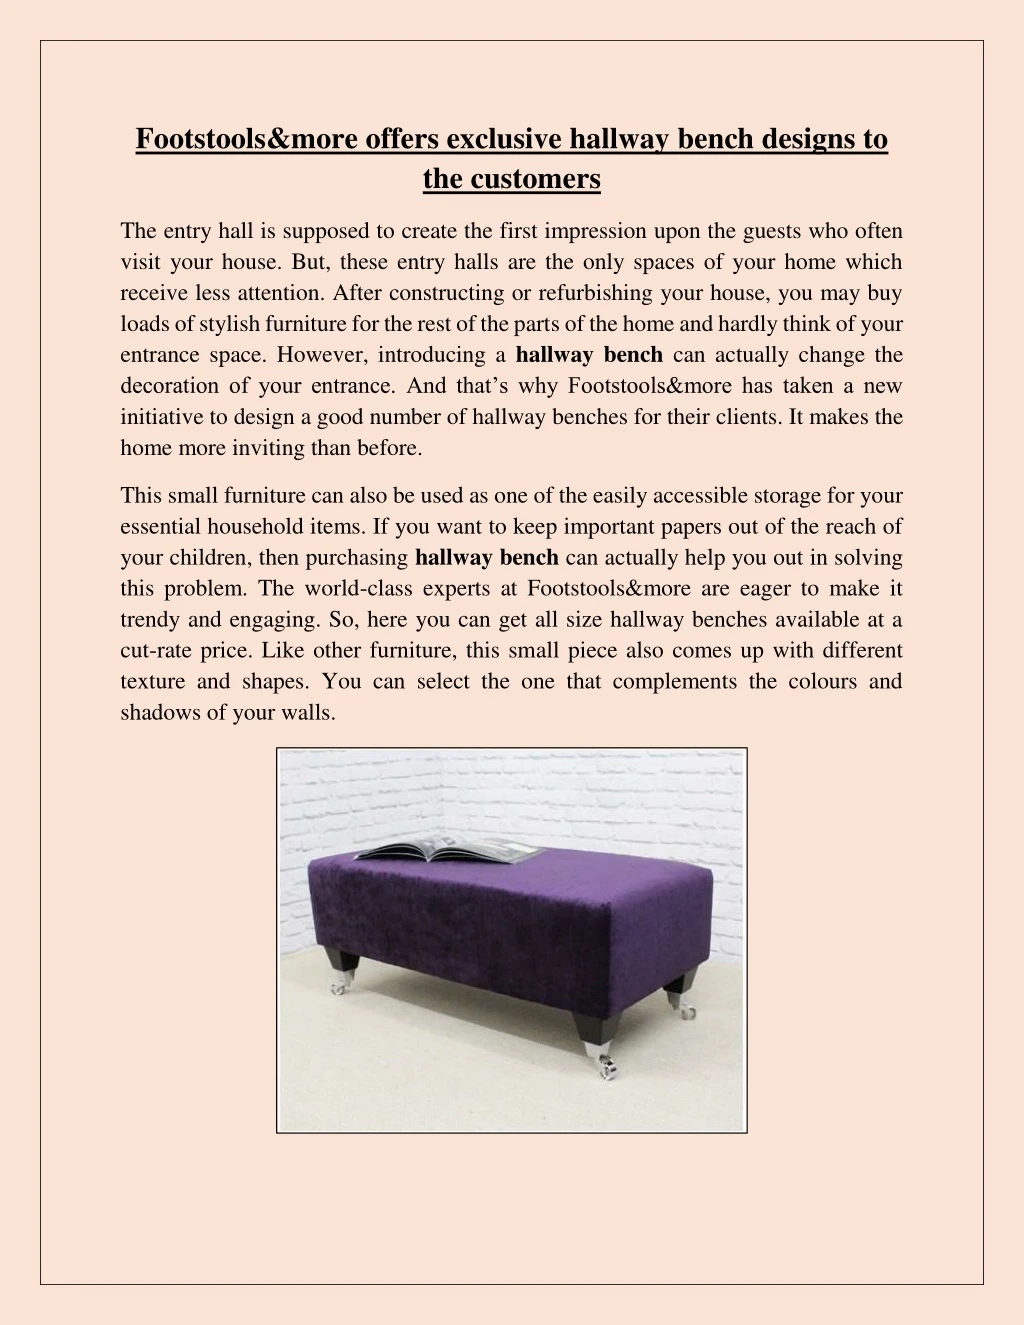 footstools more offers exclusive hallway bench